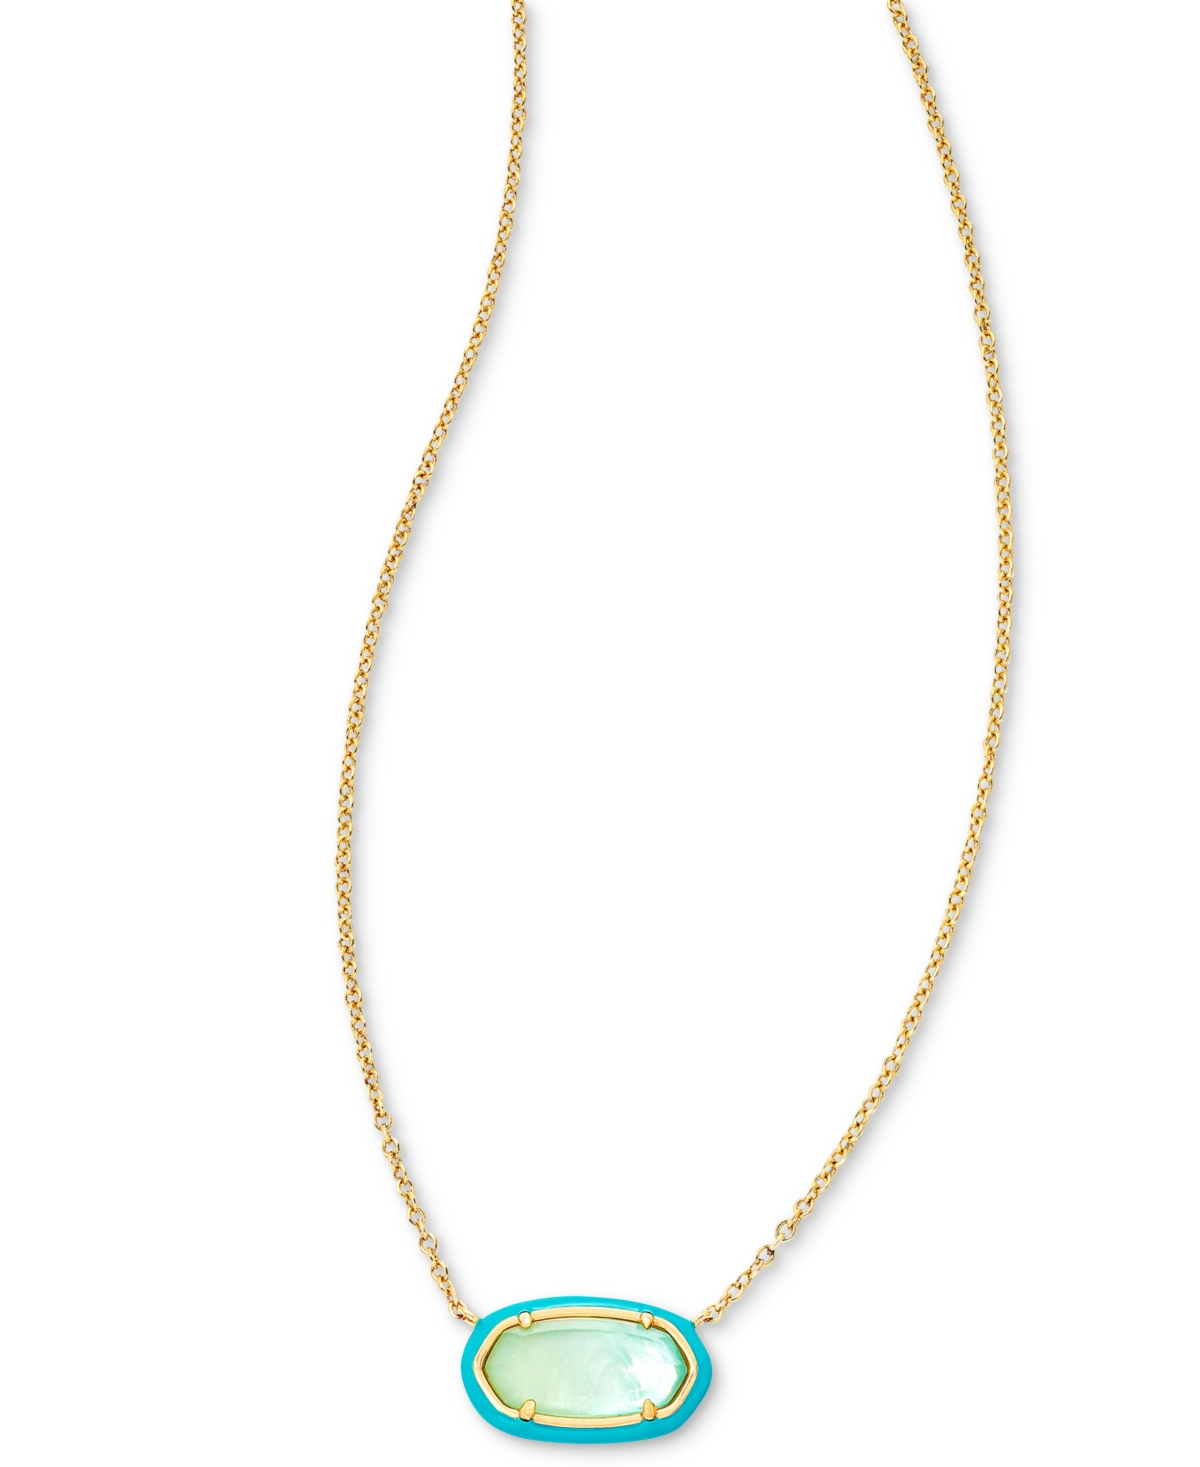 Kendra Scott 14k Gold-plated Color-framed Stone 19" Adjustable Pendant Necklace In Sea Green Ombre Illusion